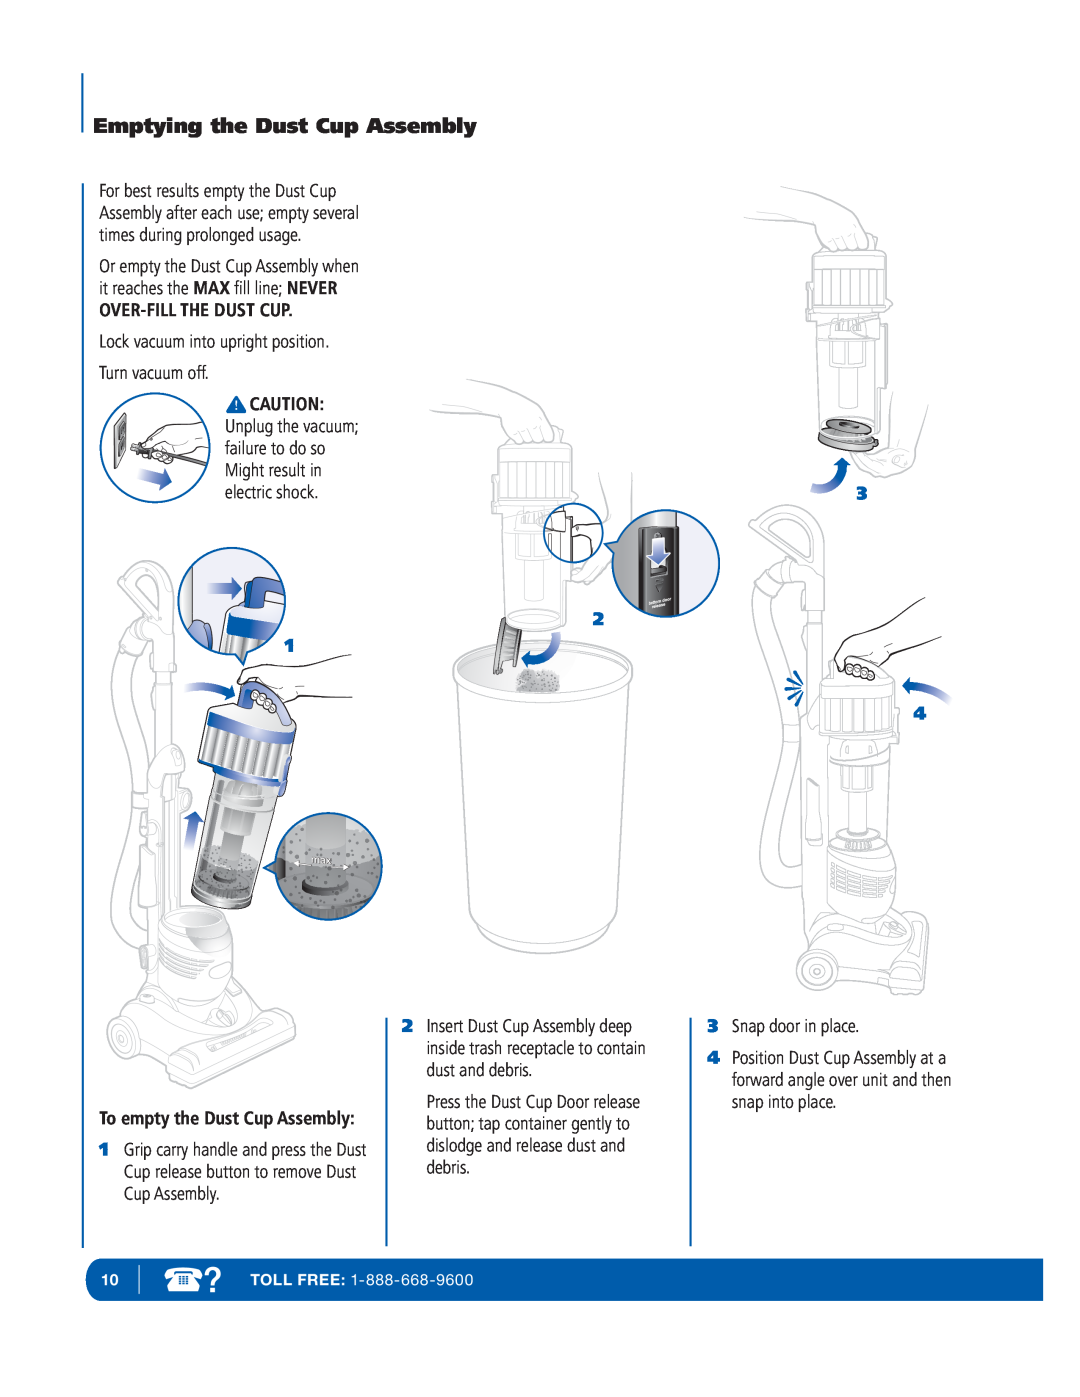 Infinity NV29 manual Over-Fillthe Dust Cup, Lock vacuum into upright position Turn vacuum off, 3Snap door in place 